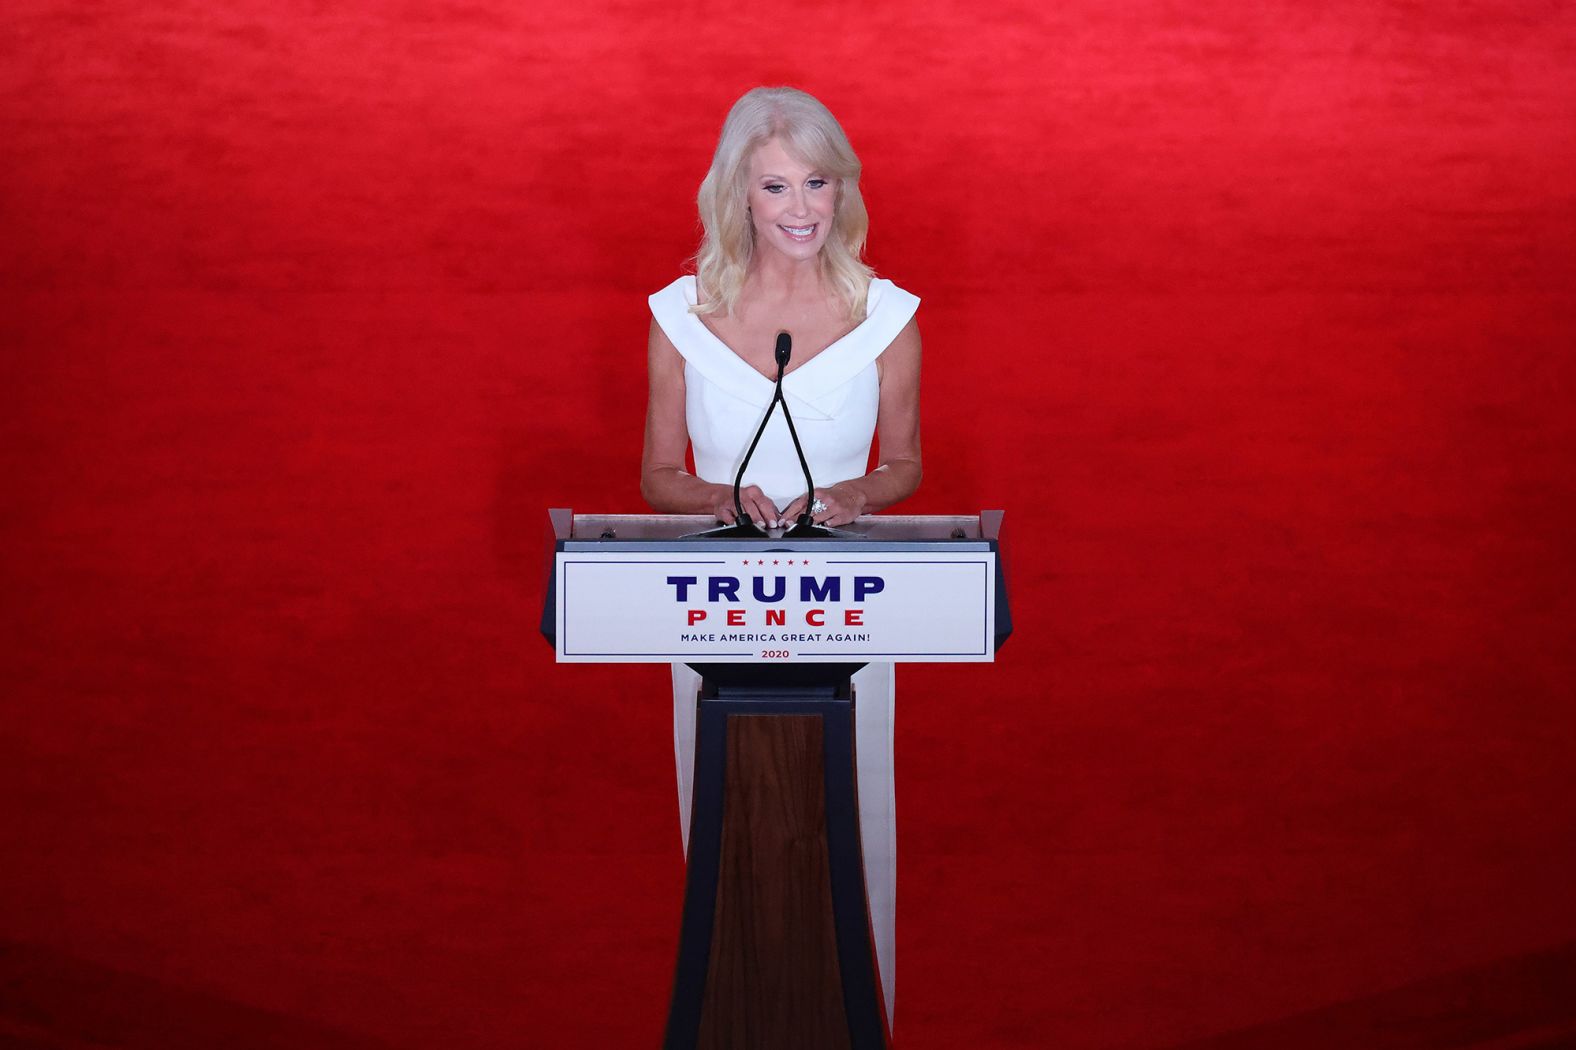 During her speech Wednesday, White House counselor Kellyanne Conway<a href="index.php?page=&url=https%3A%2F%2Fwww.cnn.com%2Fpolitics%2Flive-news%2Frnc-2020-day-3%2Fh_c1d96bc3a659ae14ae1a1a02f51343a7" target="_blank"> tried to make the case that Trump is a champion for women.</a> She said that for decades Trump has "elevated women to senior positions in business and in government," and he "confides in and consults us, respects our opinions and insists that we are on equal footing with the men." Conway announced Sunday that she would be leaving the White House at the end of the month.